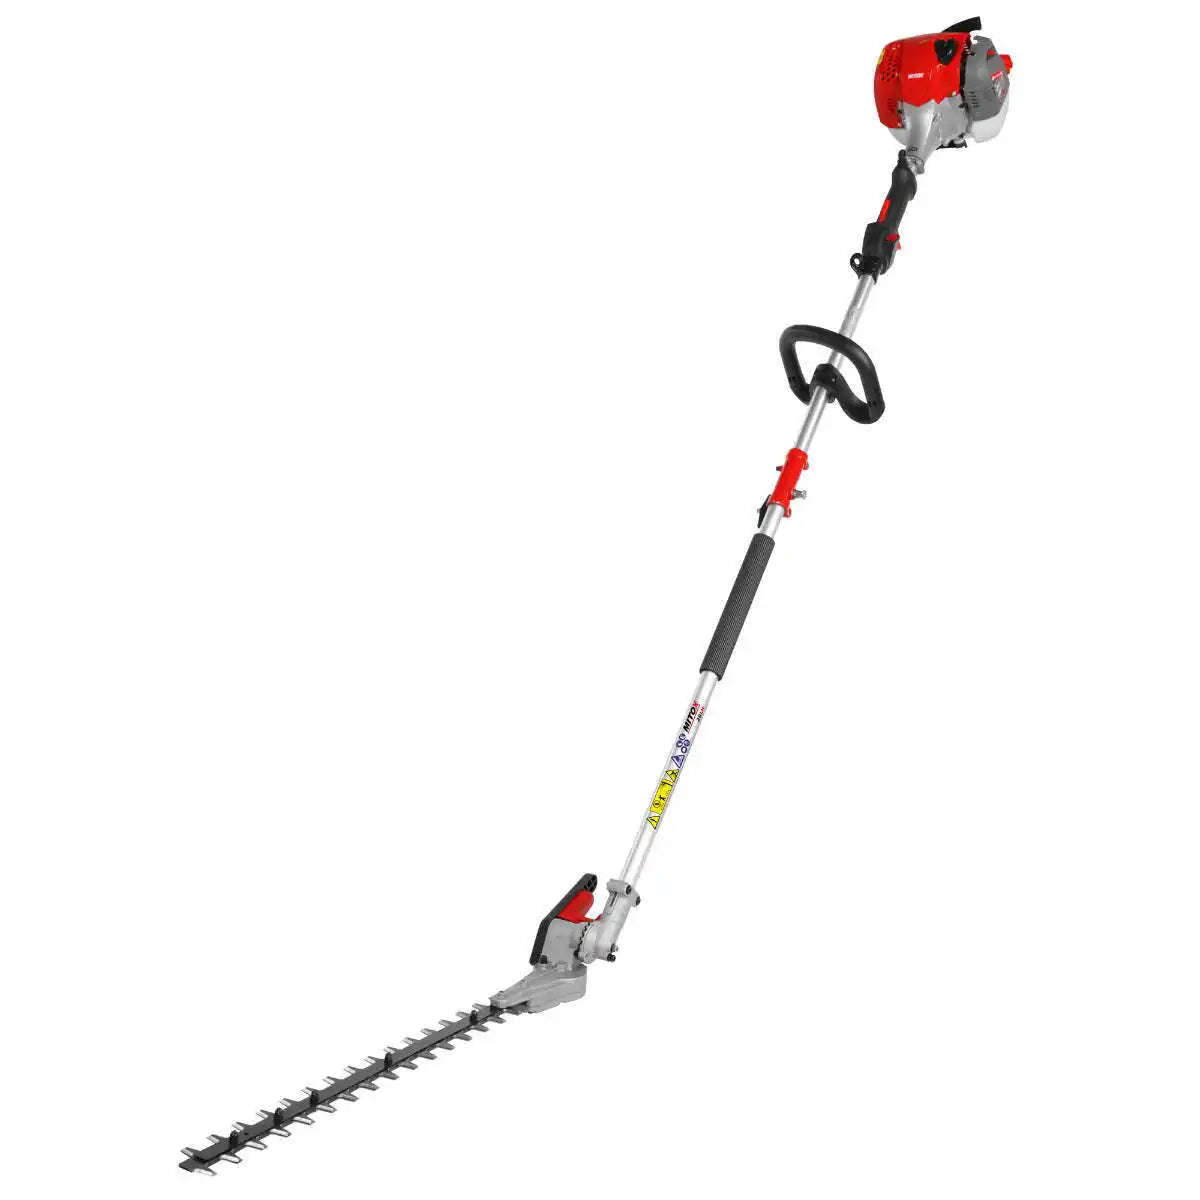 MITOX 28LH Long Reach Hedge Trimmer